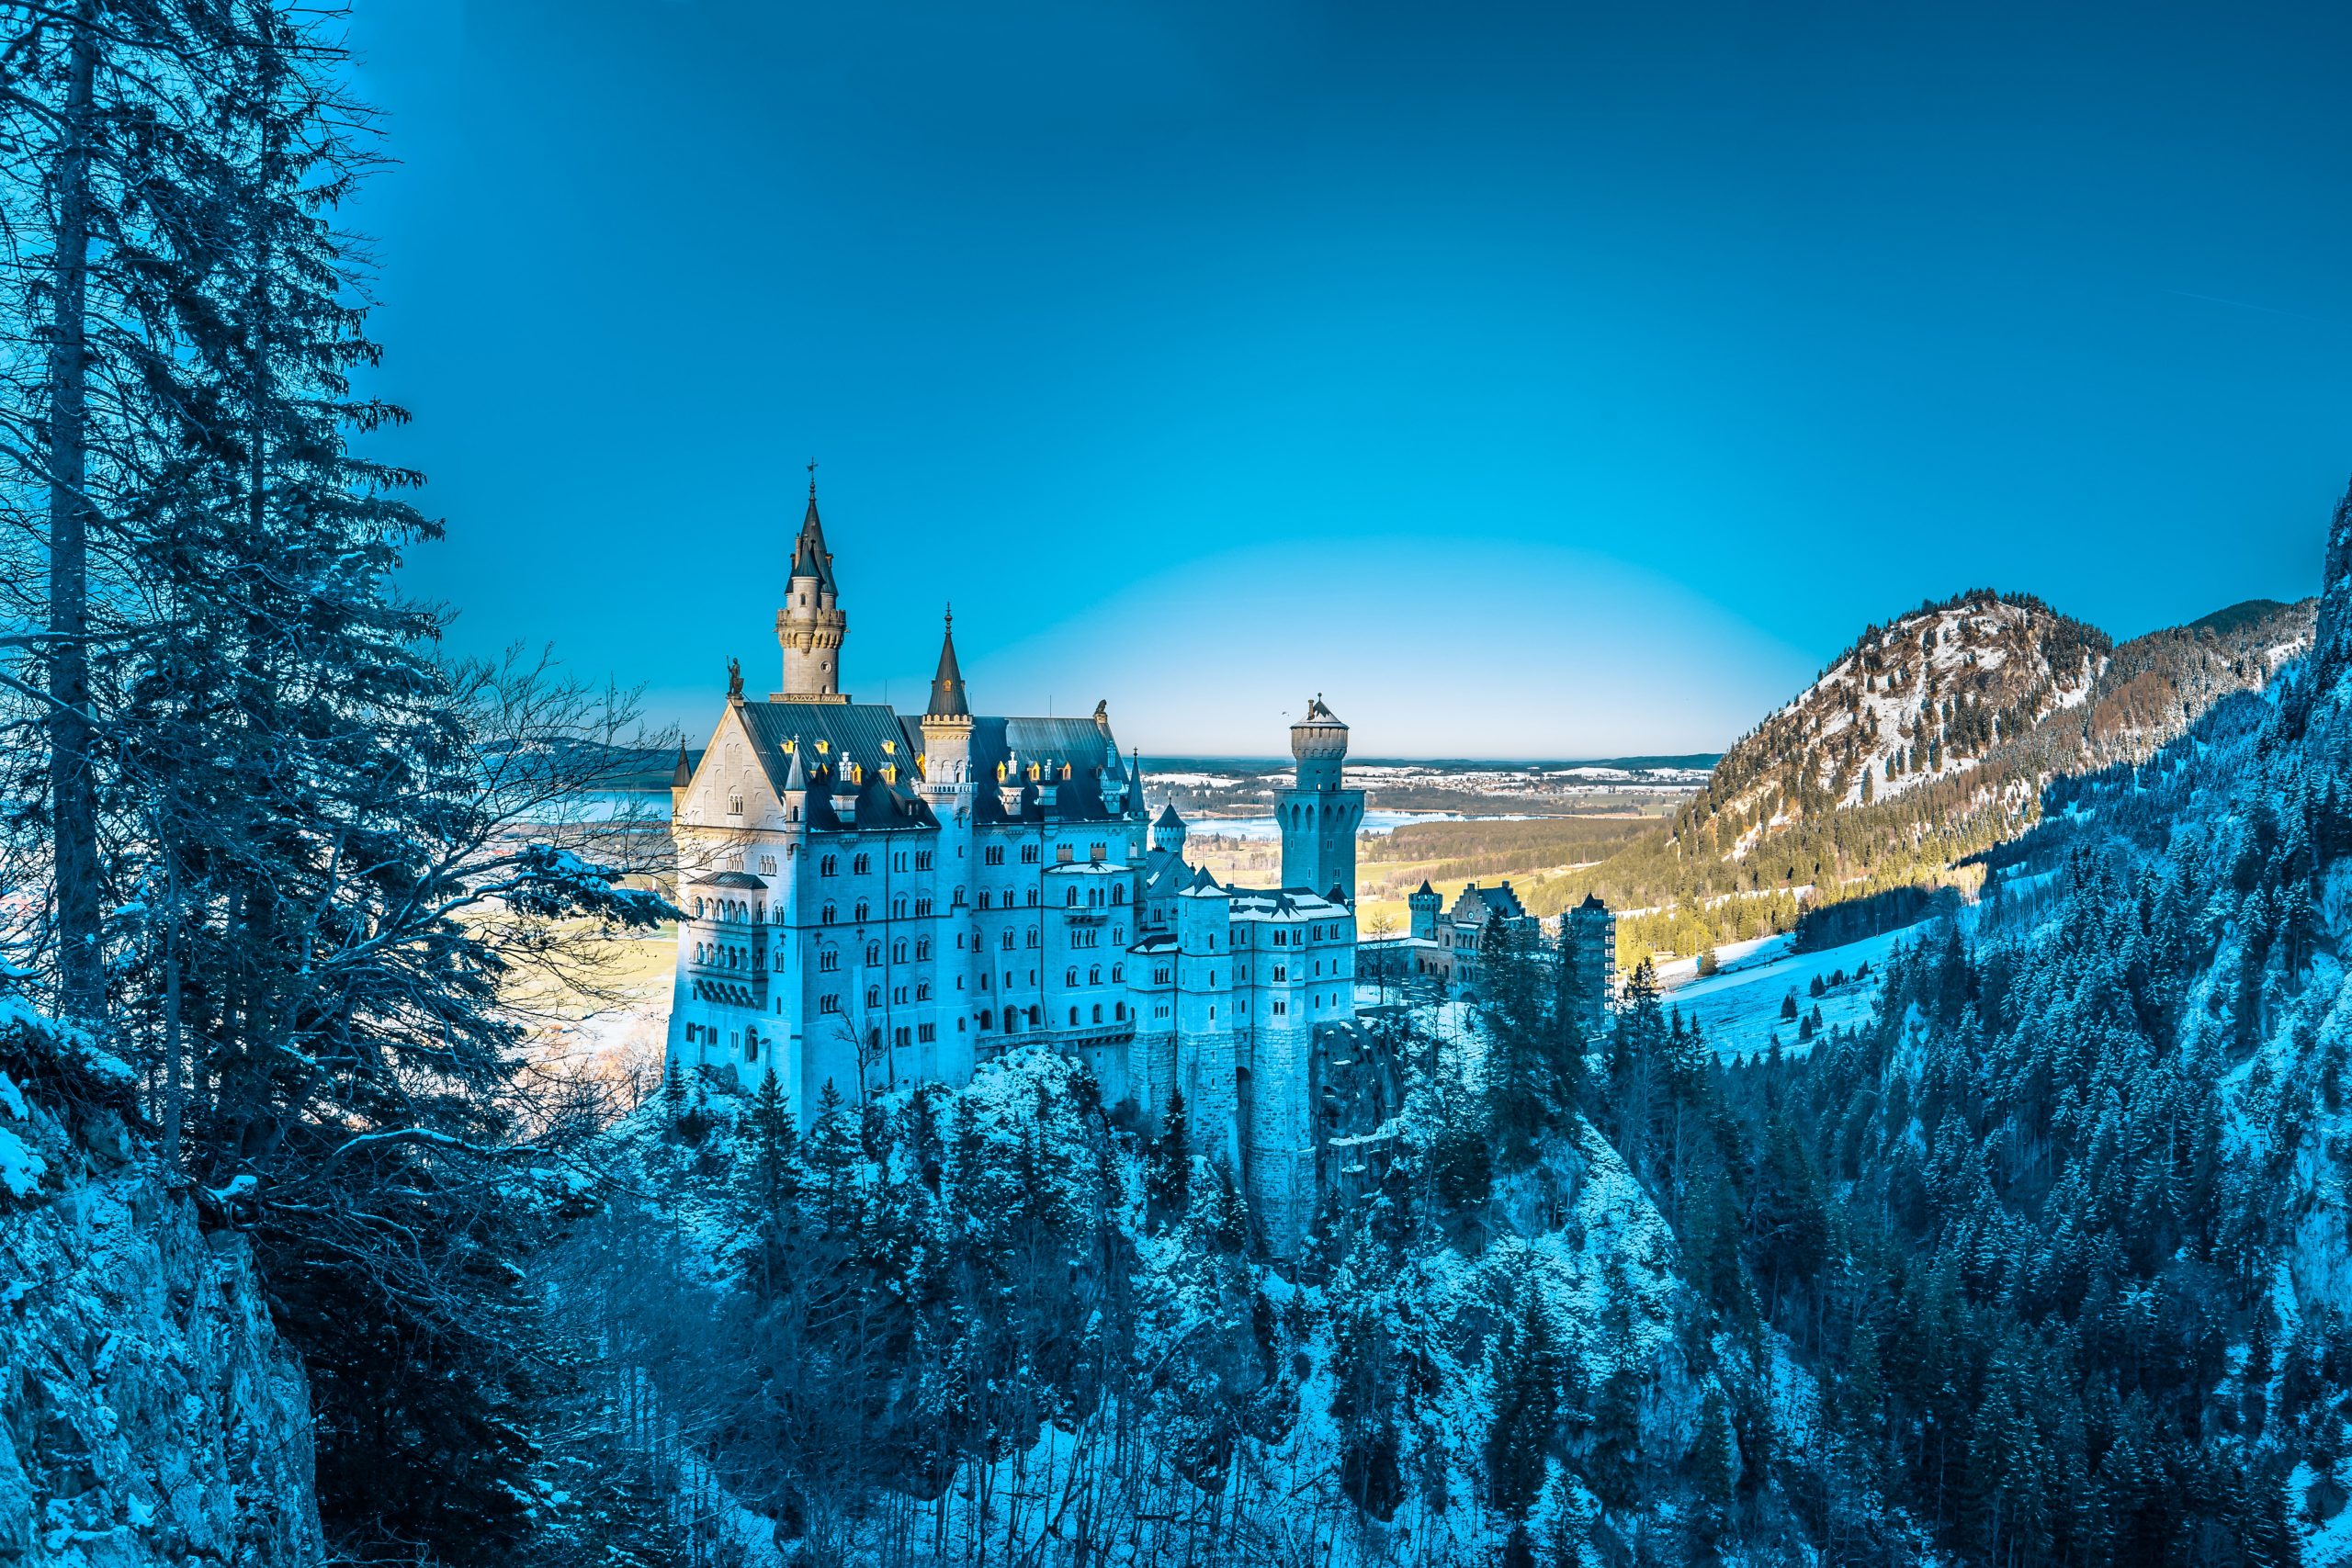 Neuschwanstein Castle as one of the main tourist points in Germany